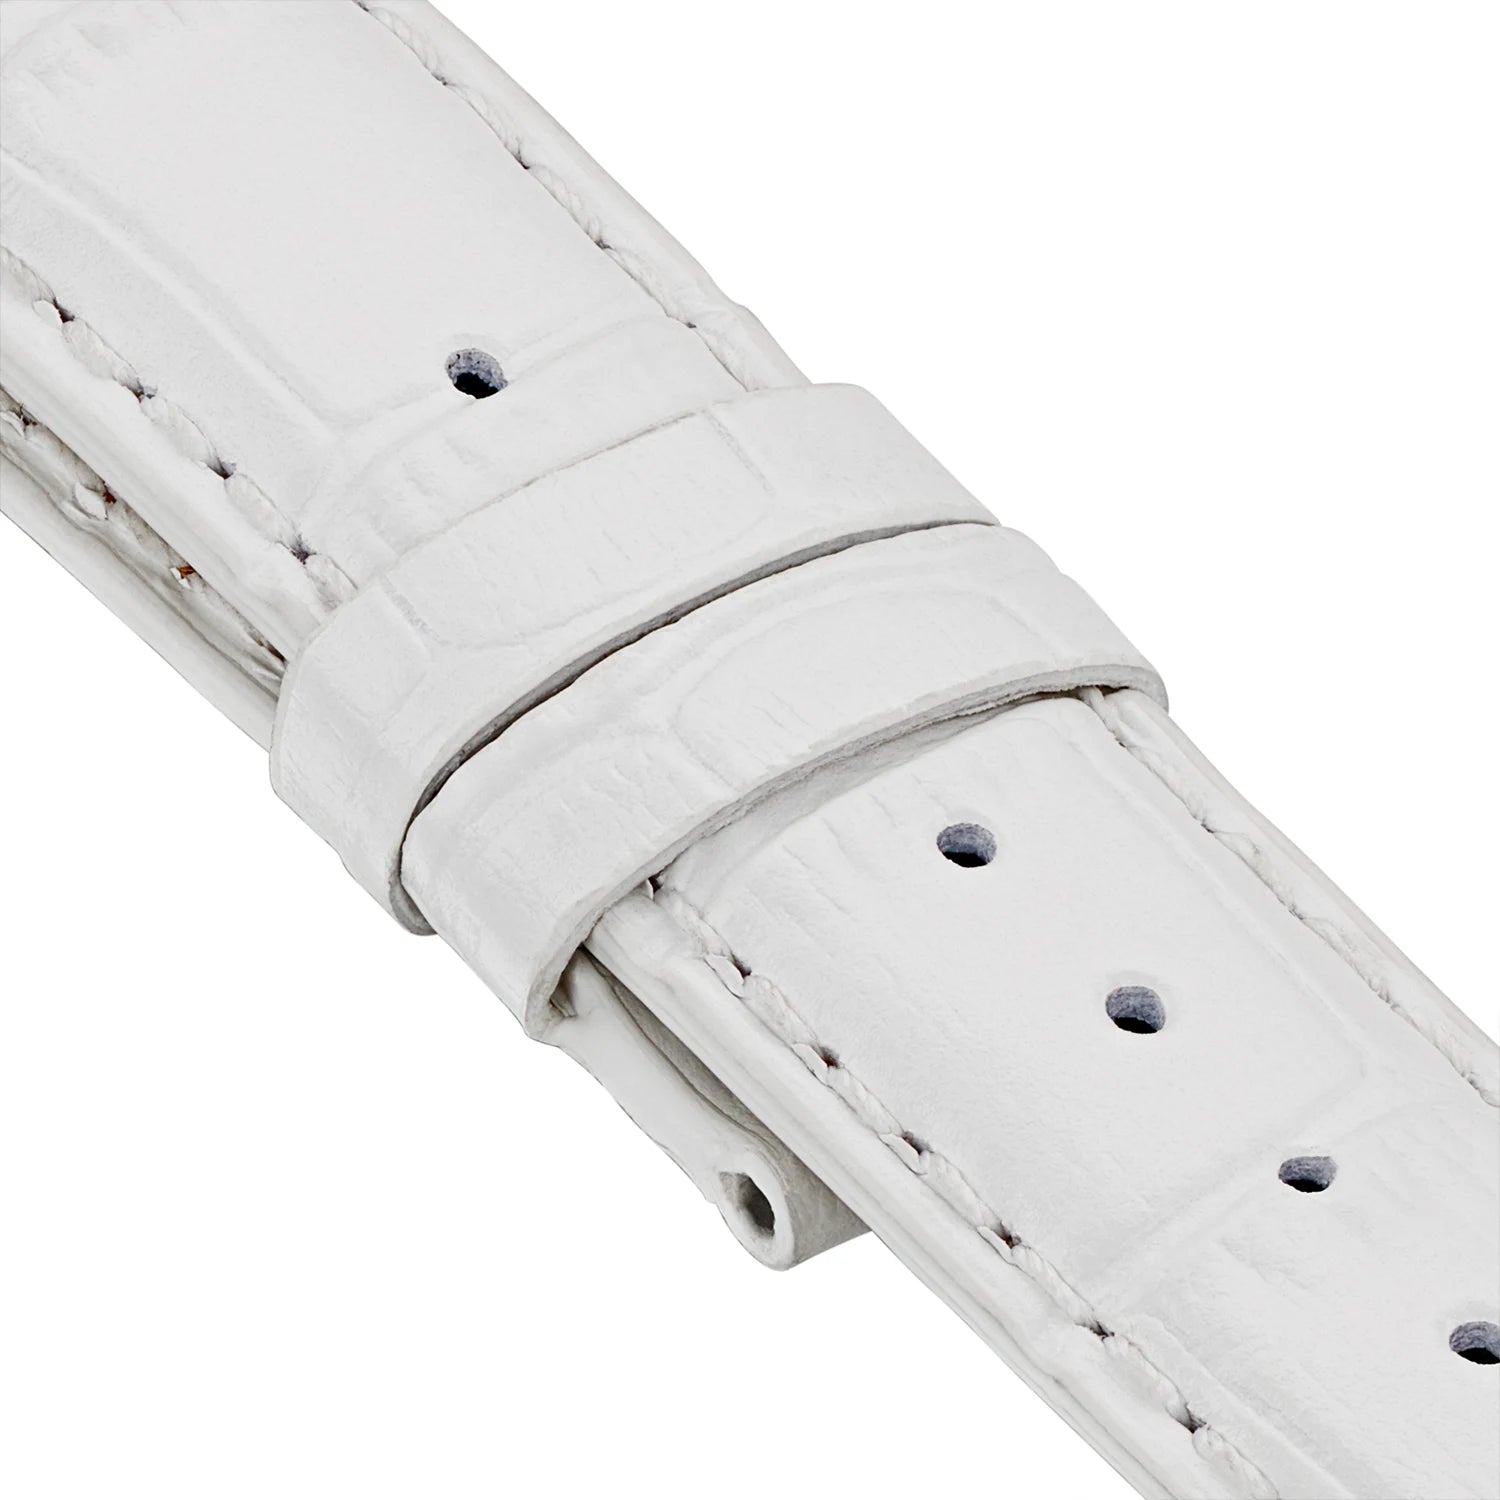 Leather Strap with Alligator Embossing - White